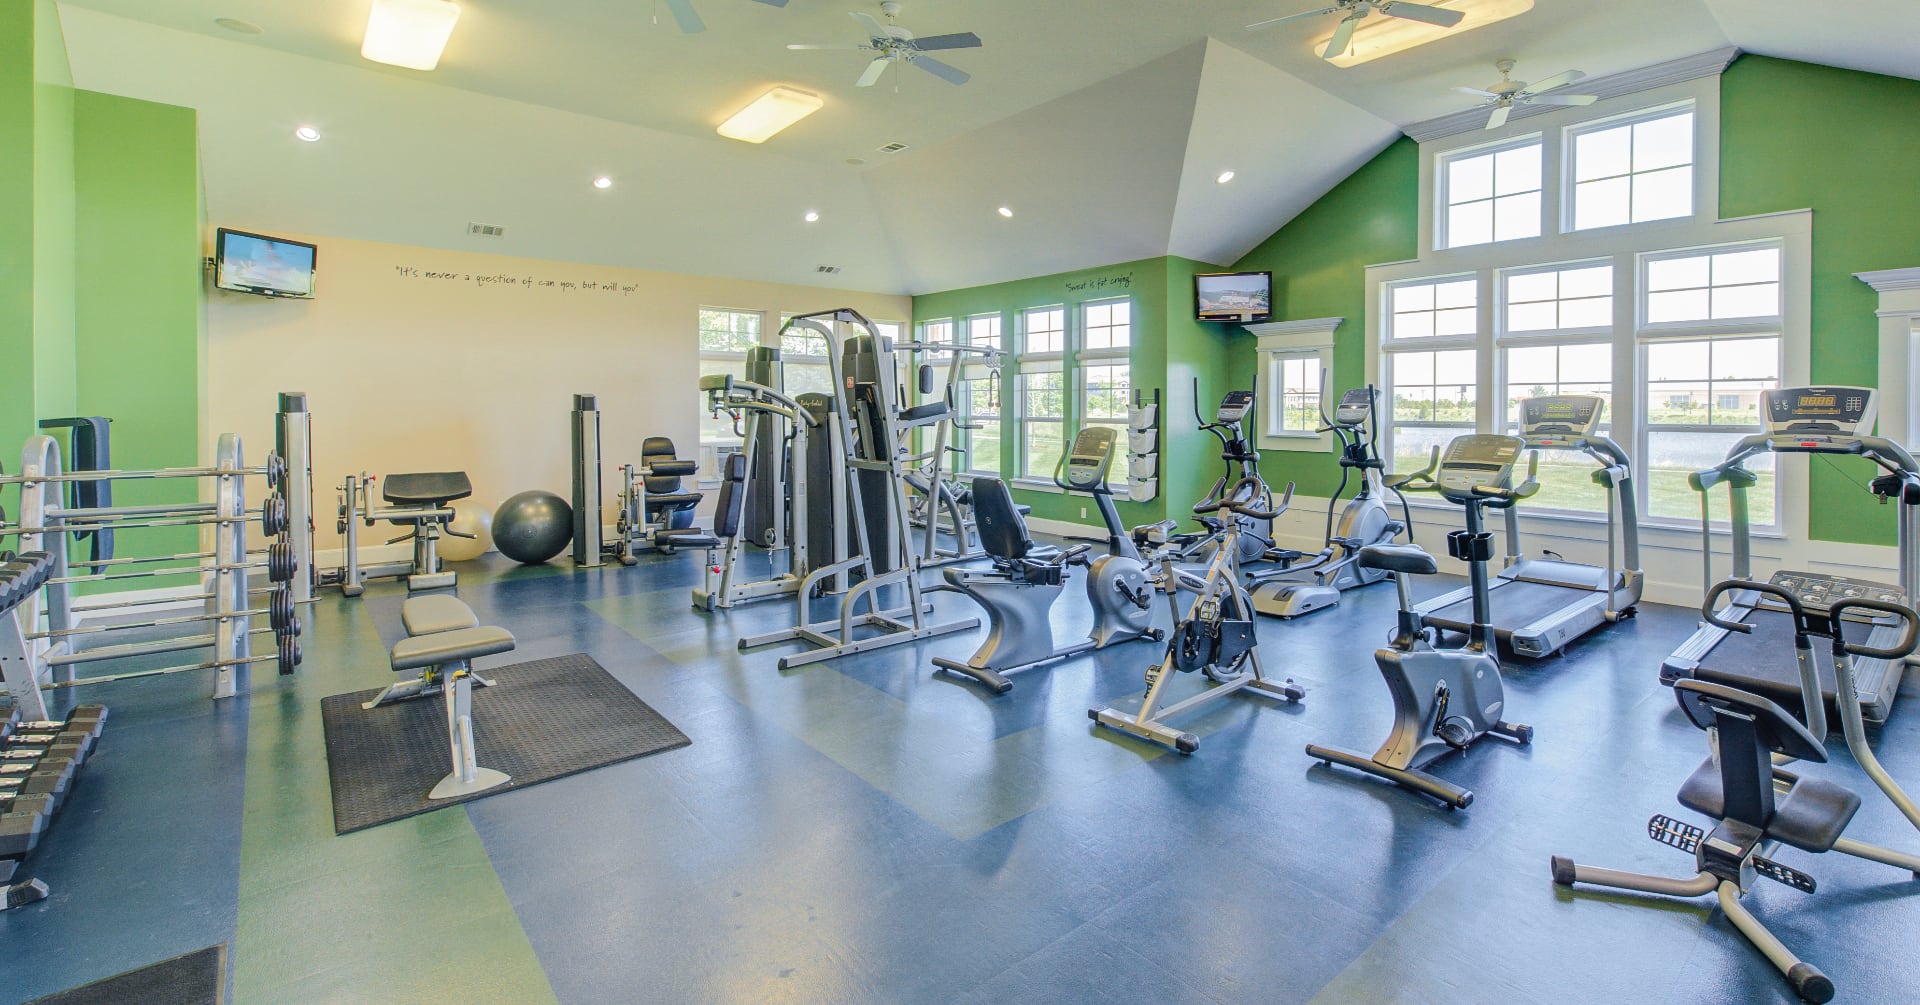 The District Fitness Center